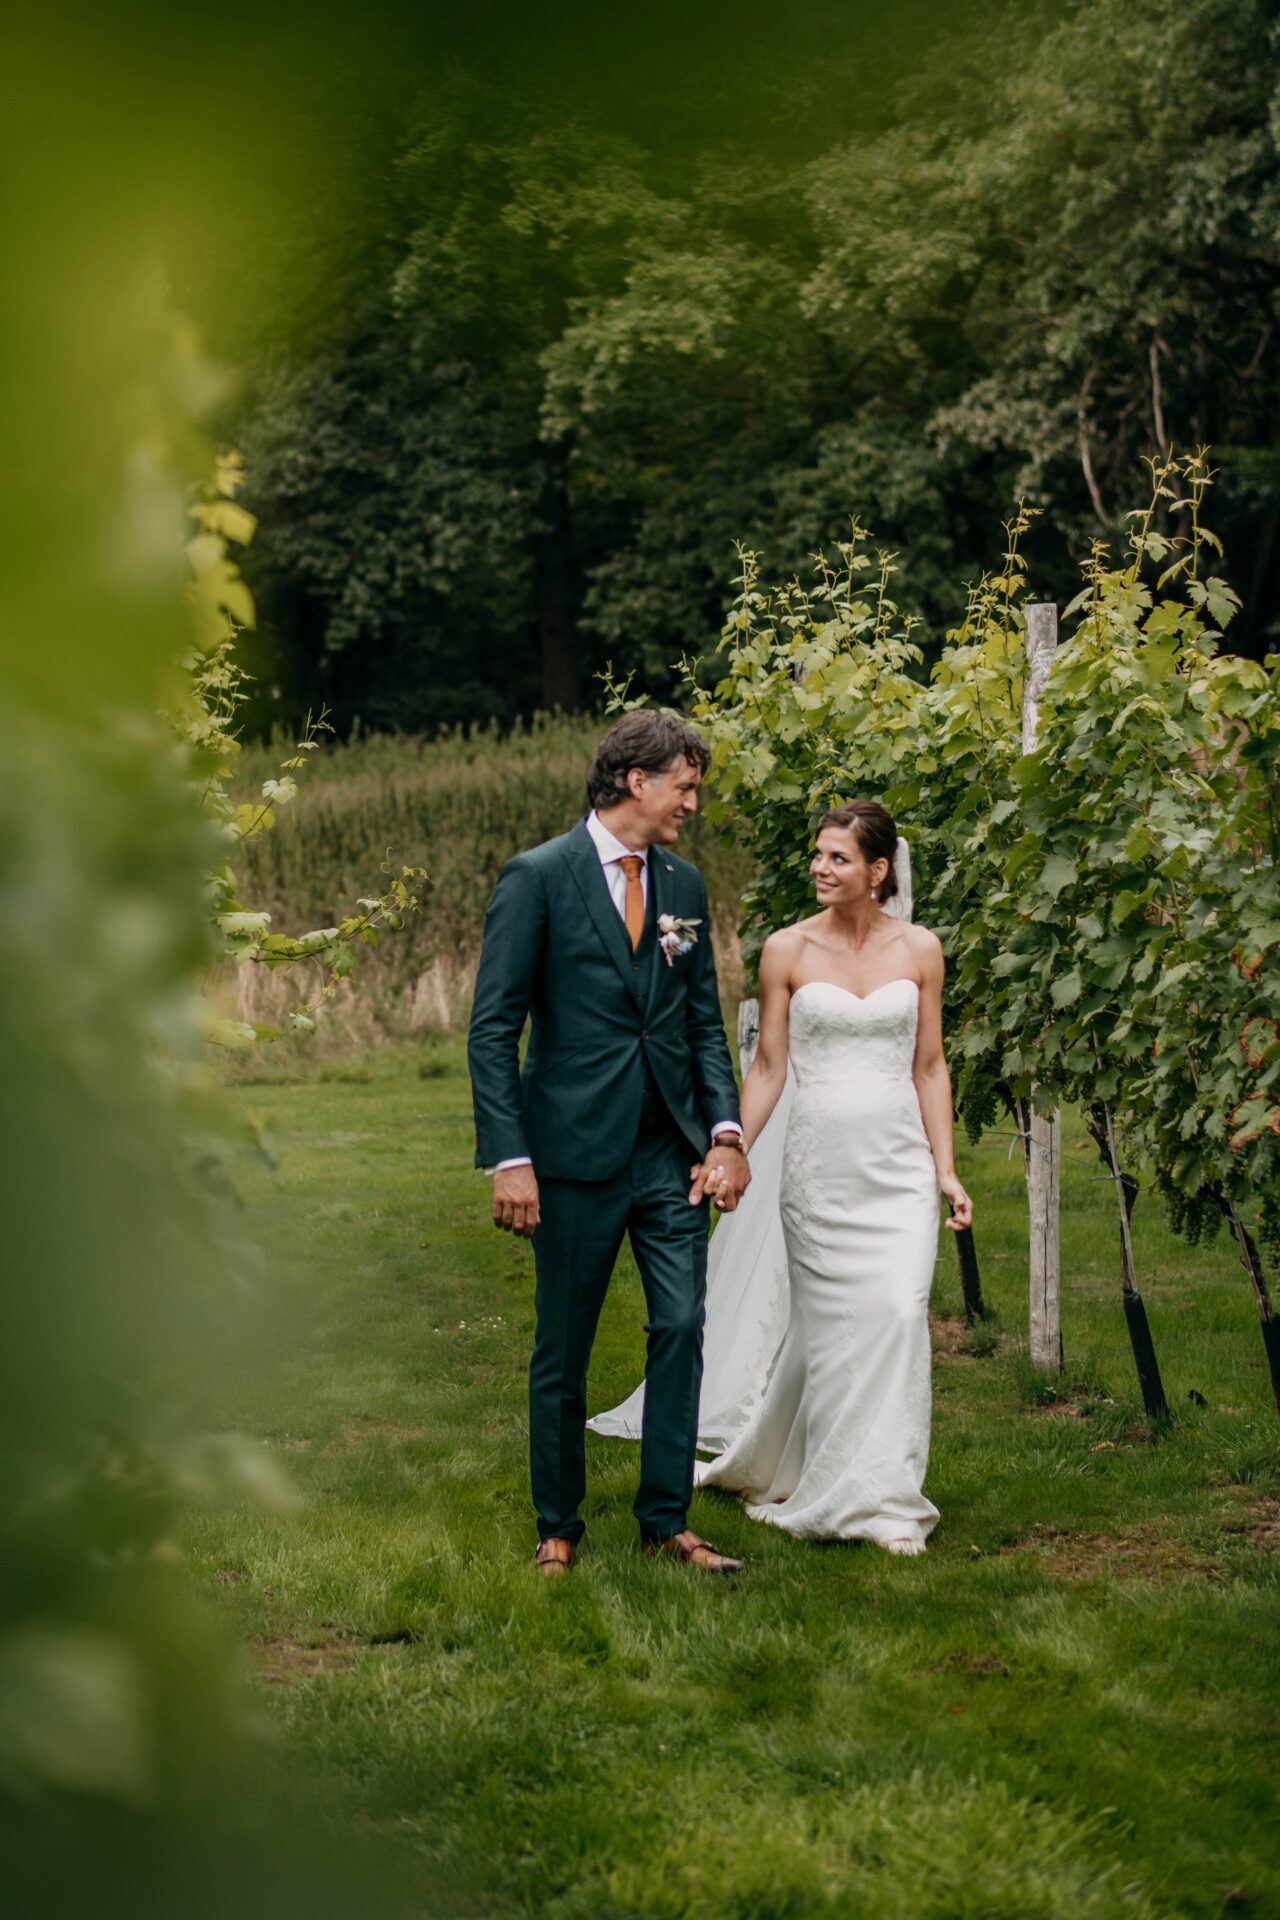 Italian rustic wedding in the South of the Netherlands at Winselerhof